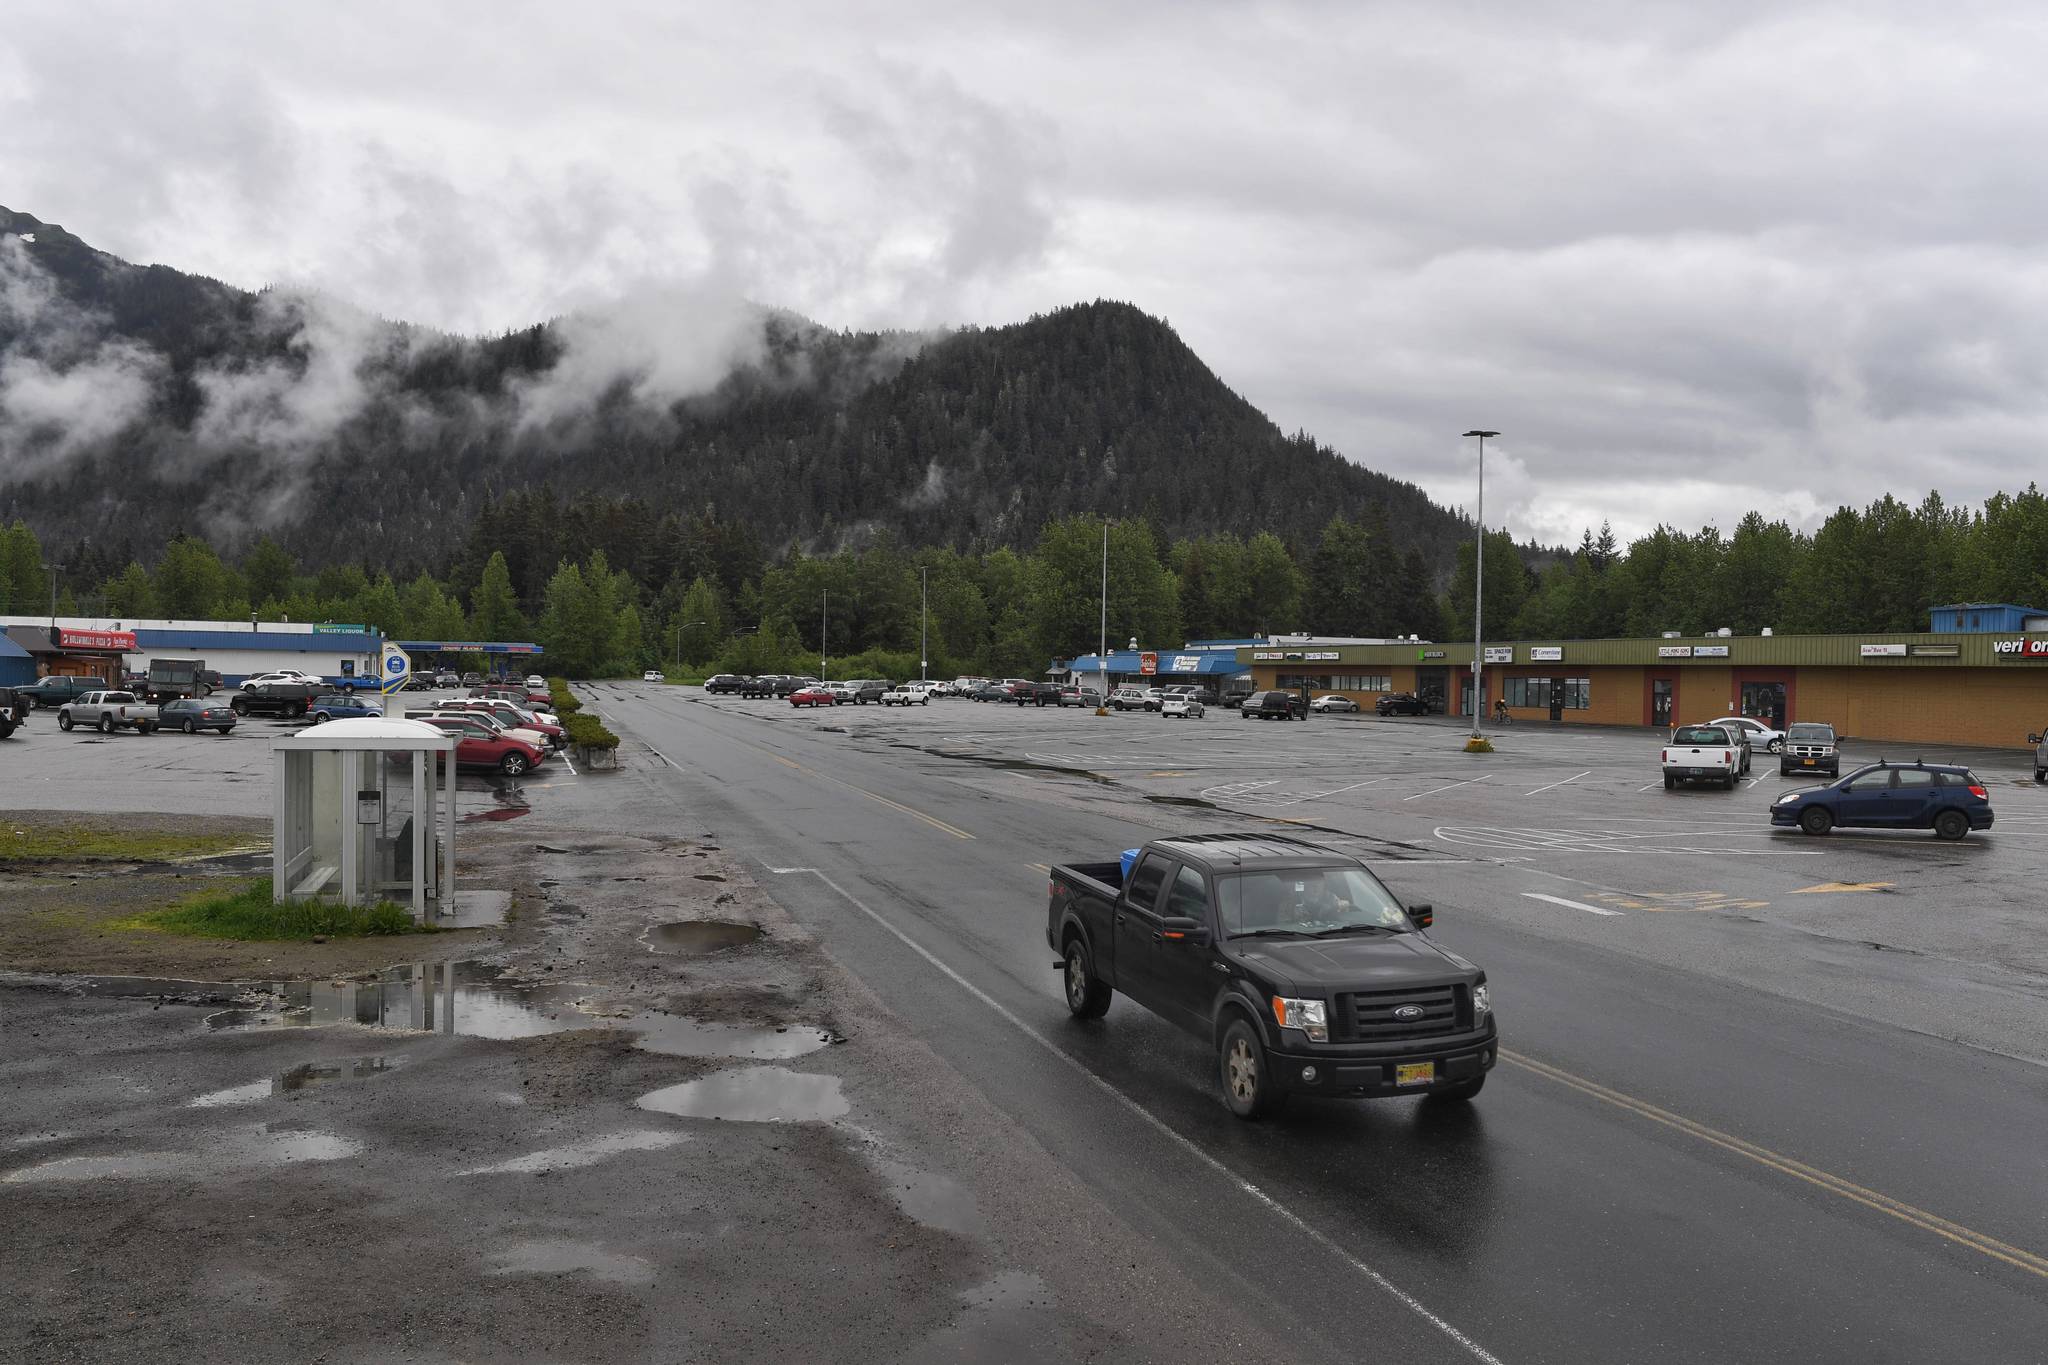 The Mendenhall Business Park is pictured on Monday, June 3, 2019. (Michael Penn | Juneau Empire)